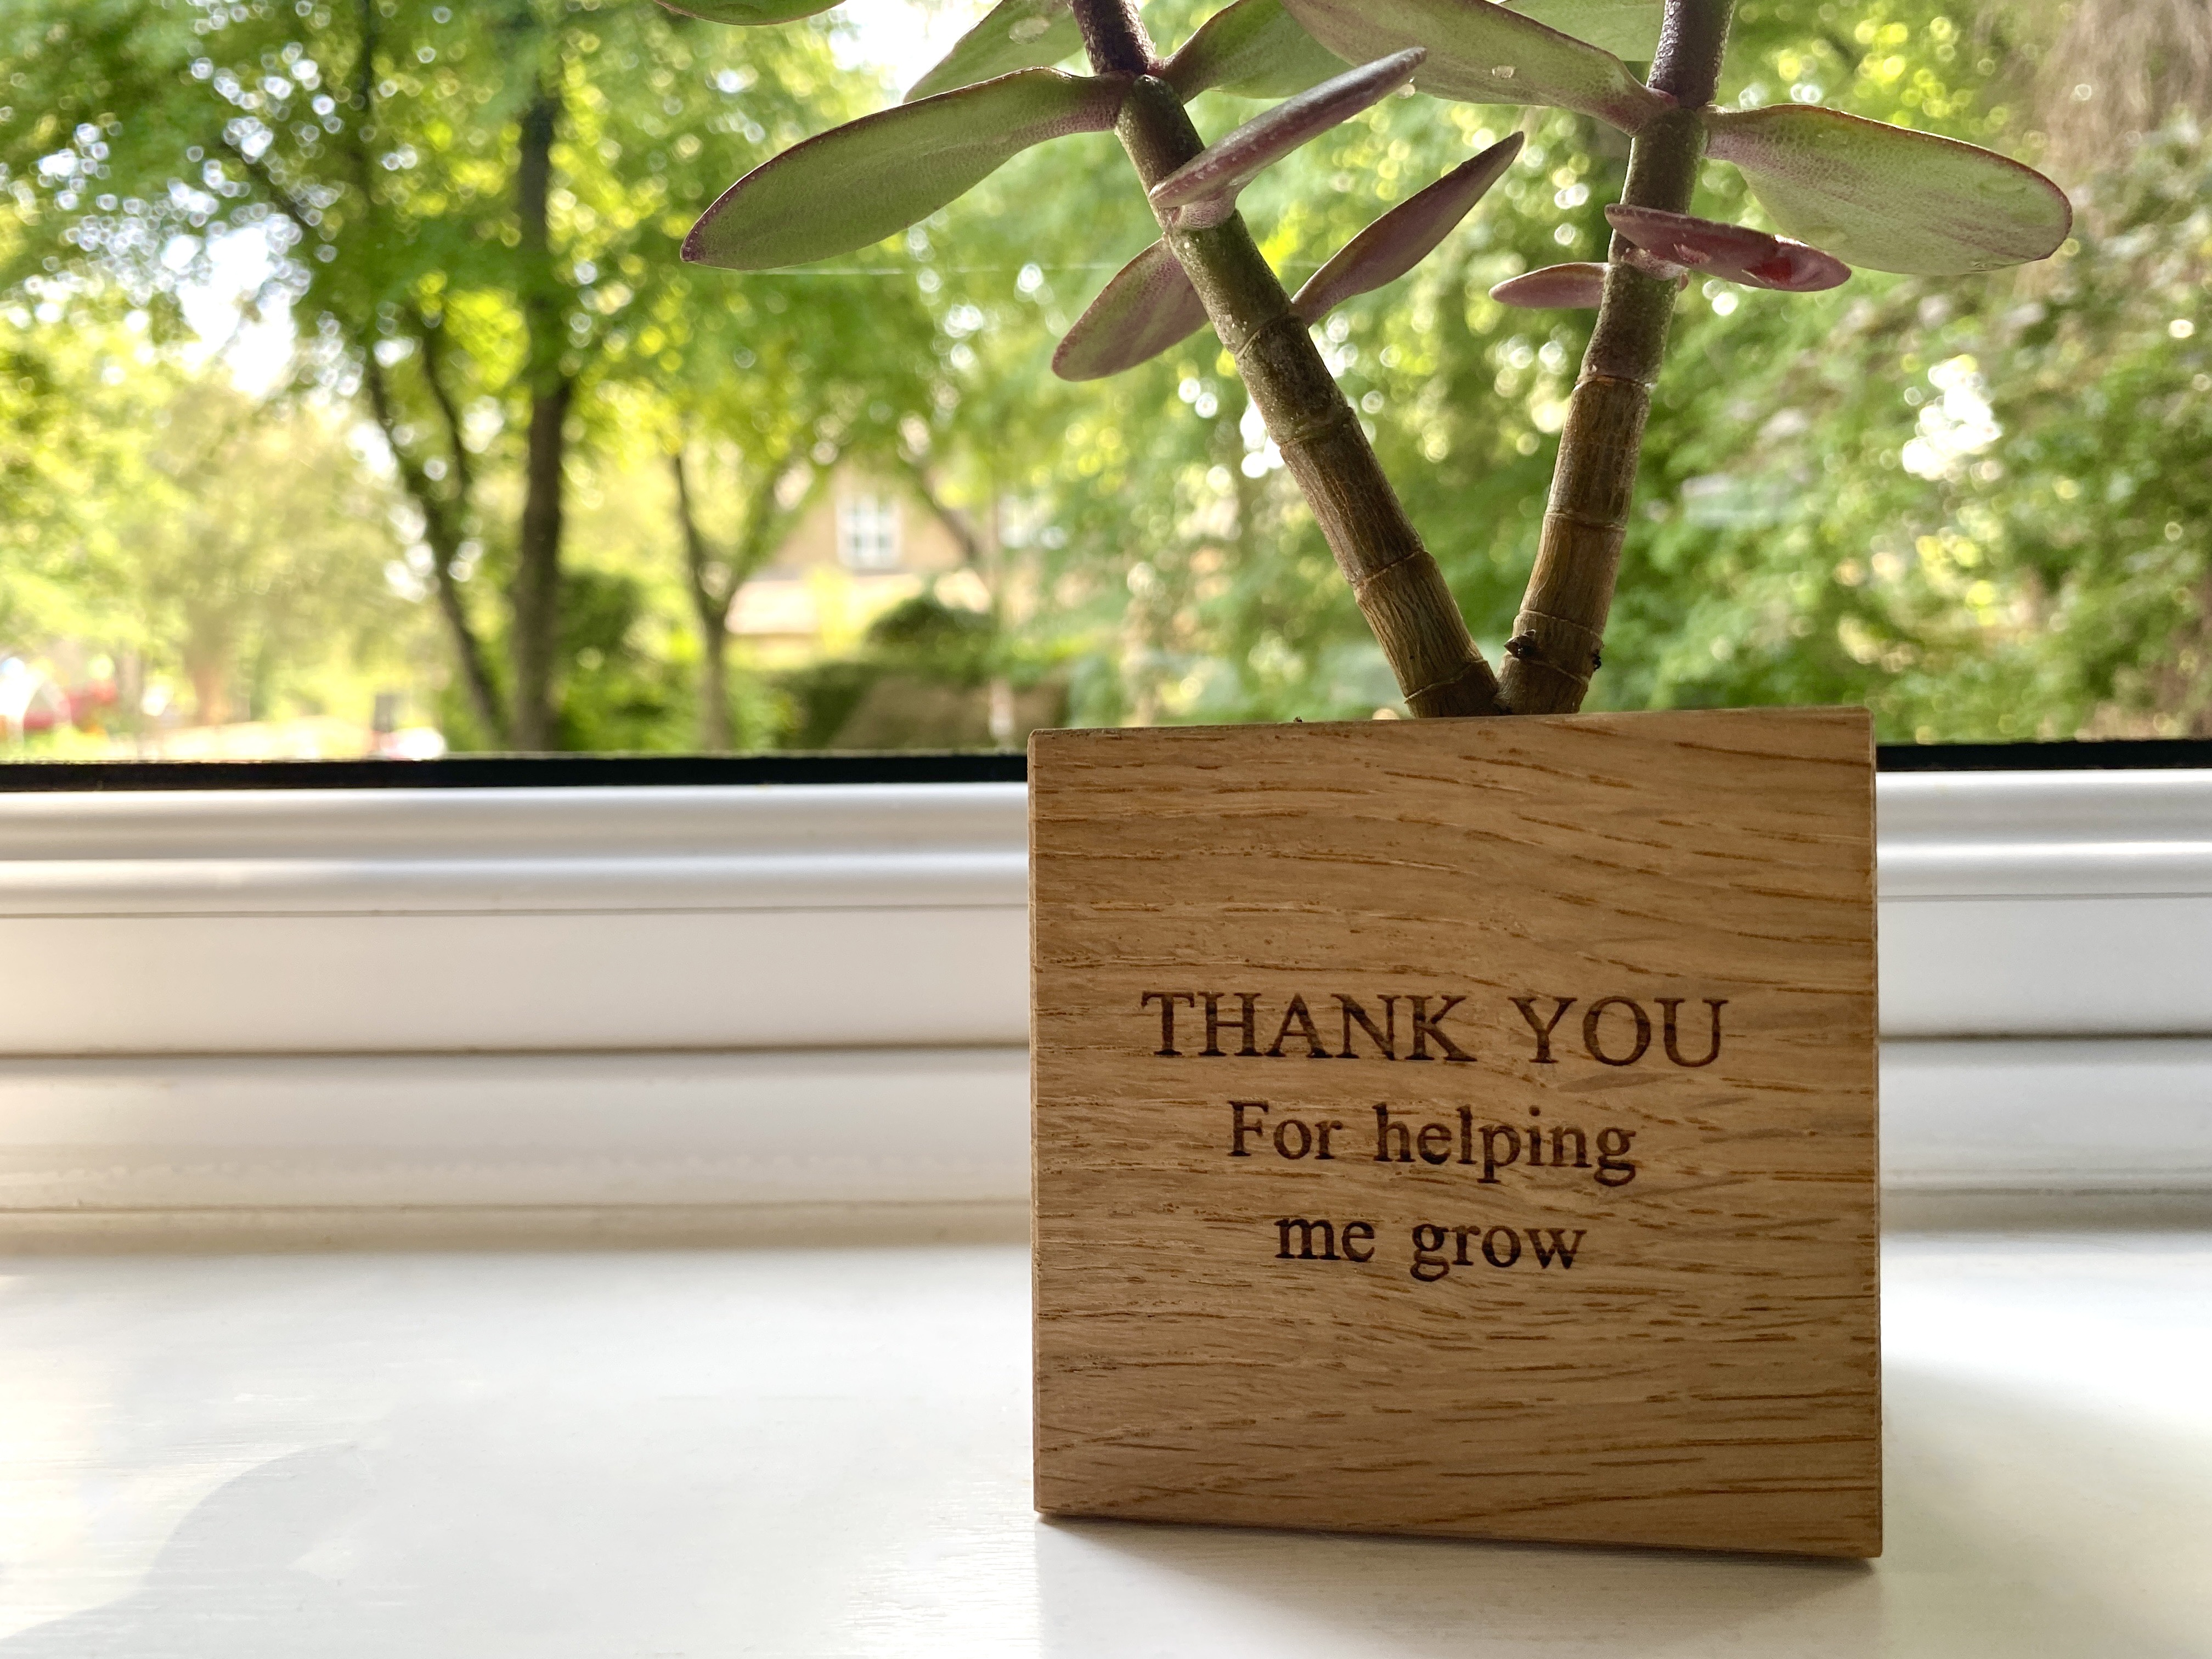 A small potted plant on a windowsill, with the inscription "Thank you for helping me grow"